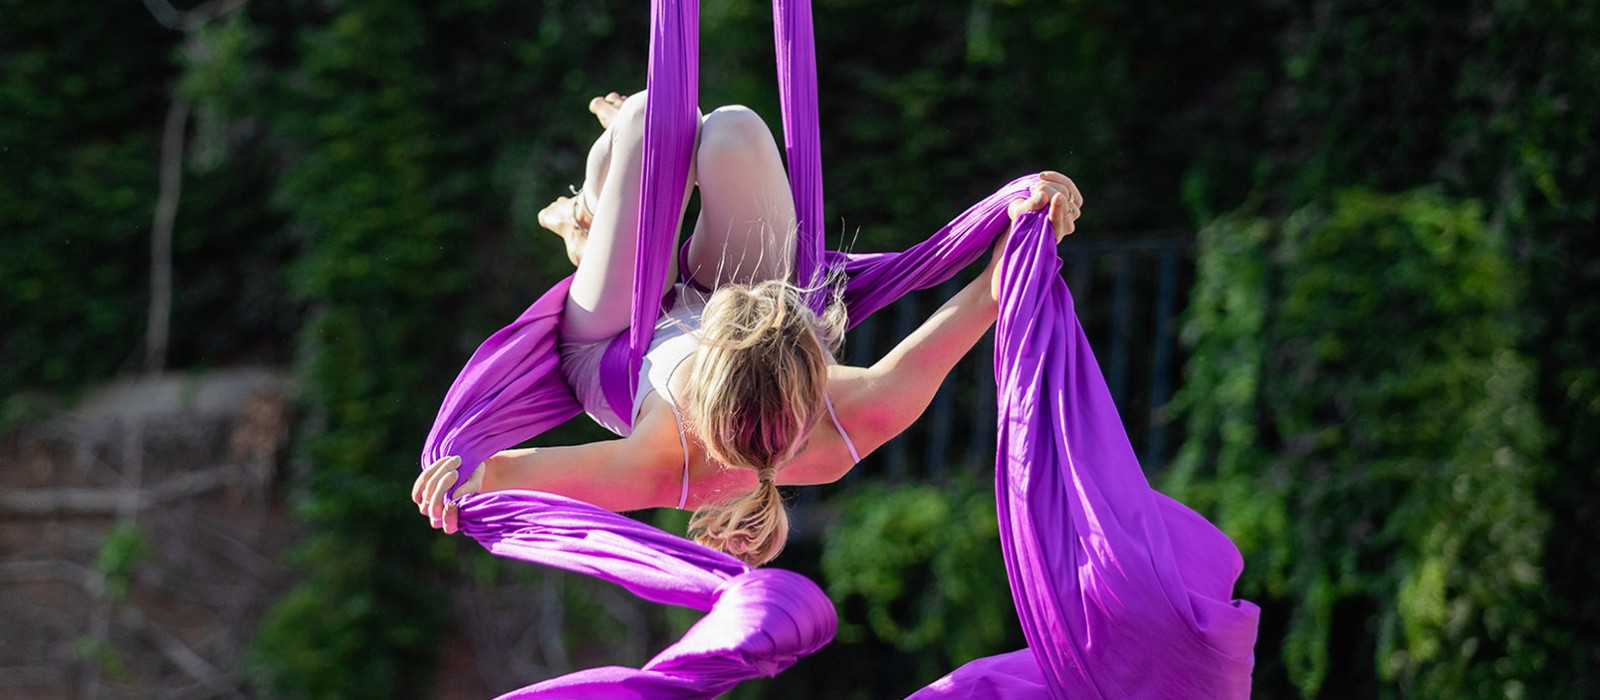 young woman suspended in the air on two purple lengths of cloth